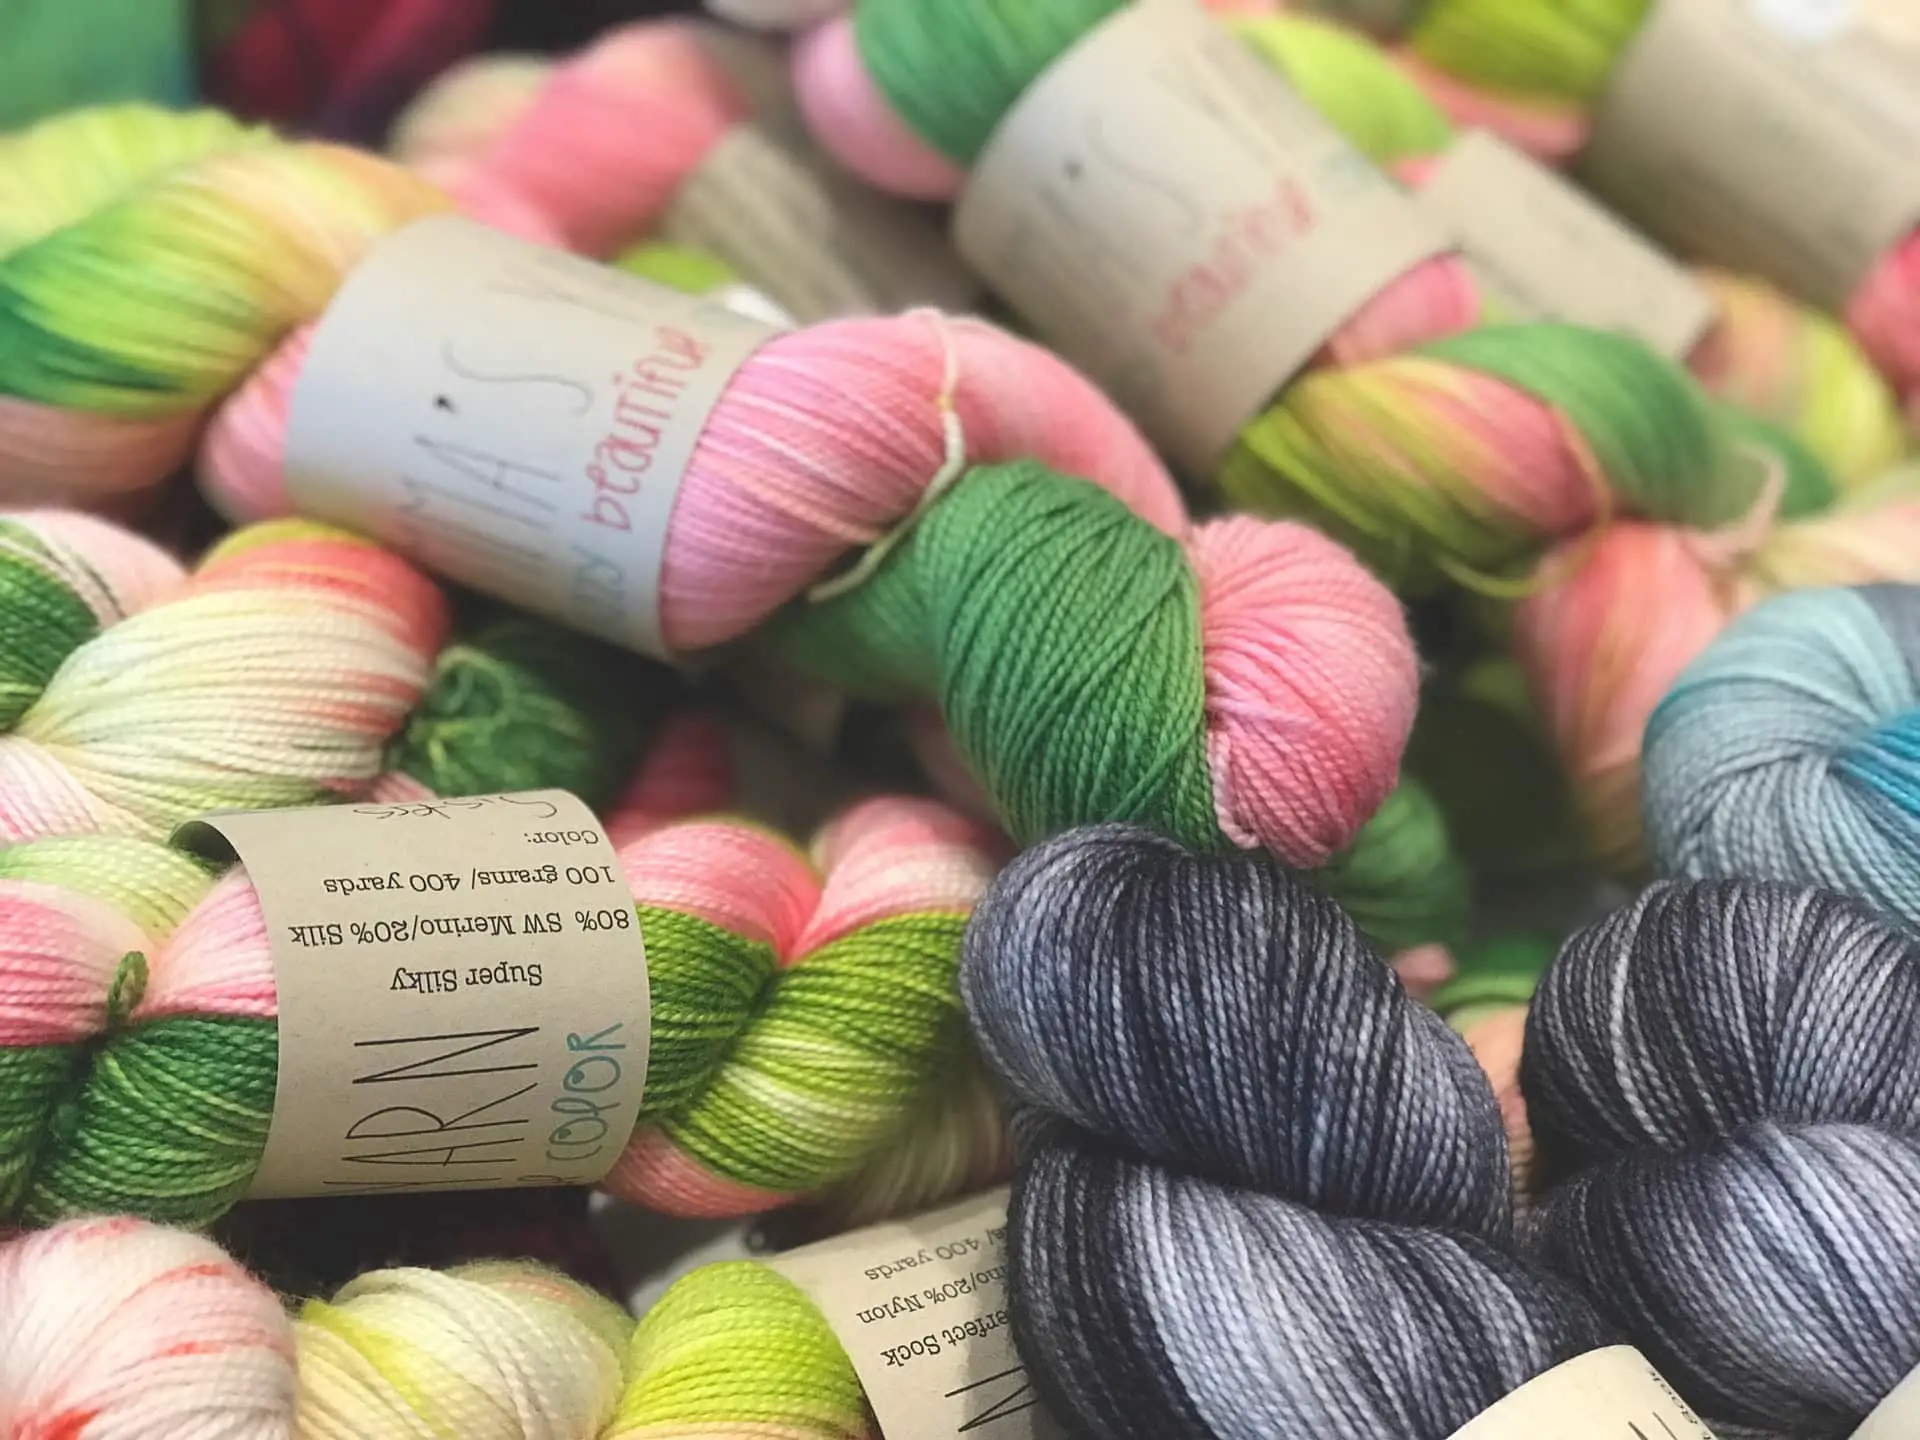 Why Is Yarn So Expensive?